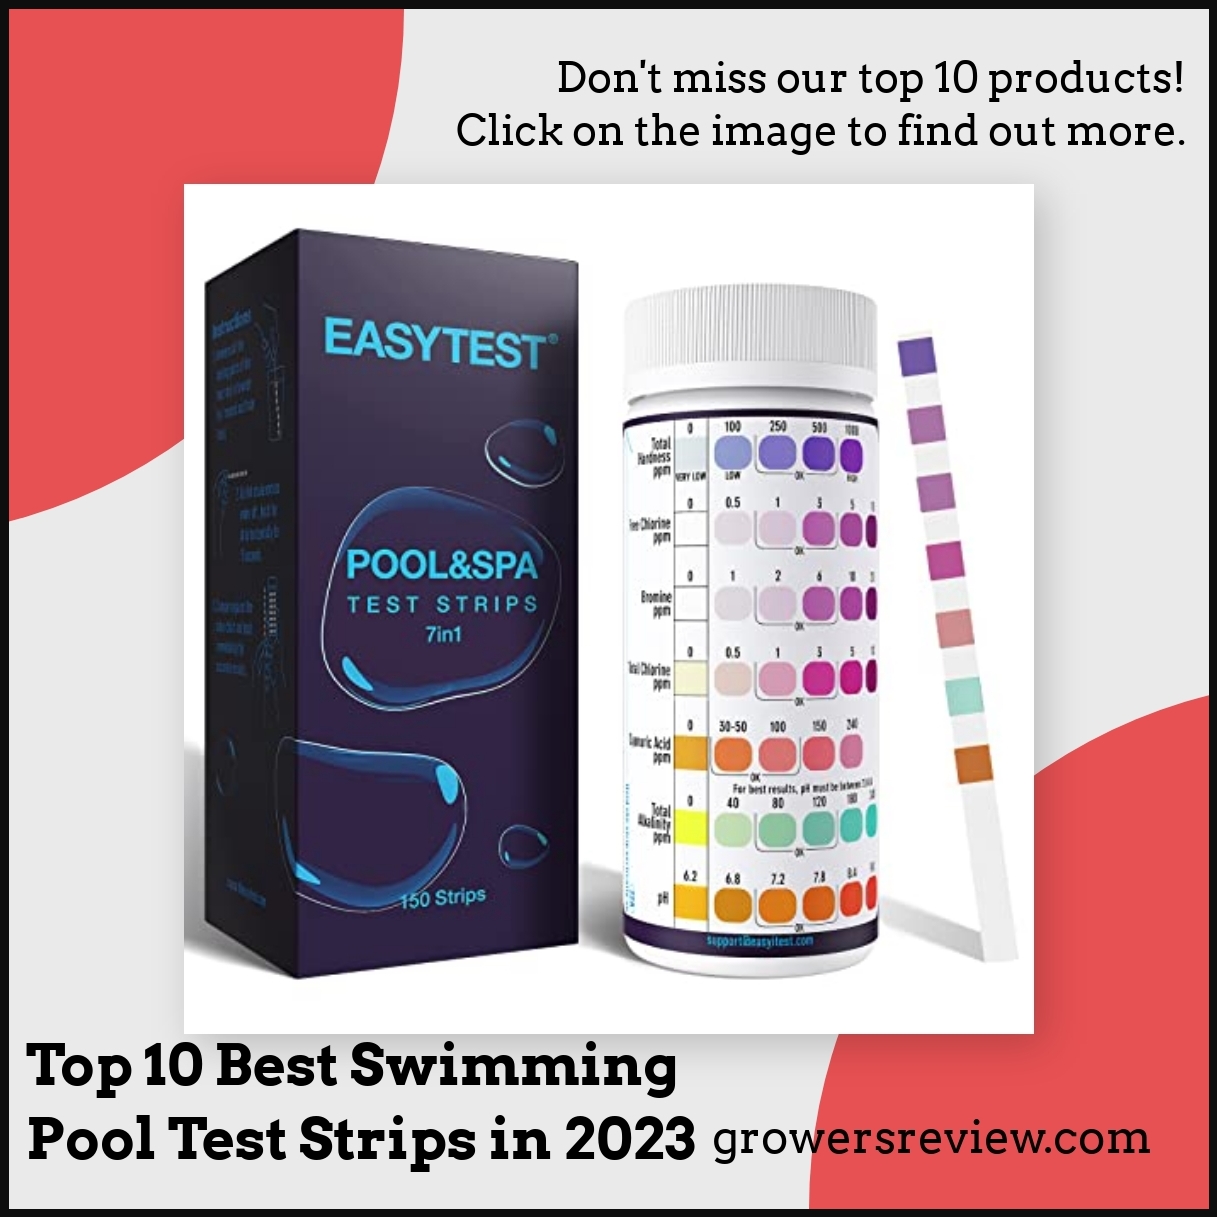 Top 10 Best Swimming Pool Test Strips in 2023